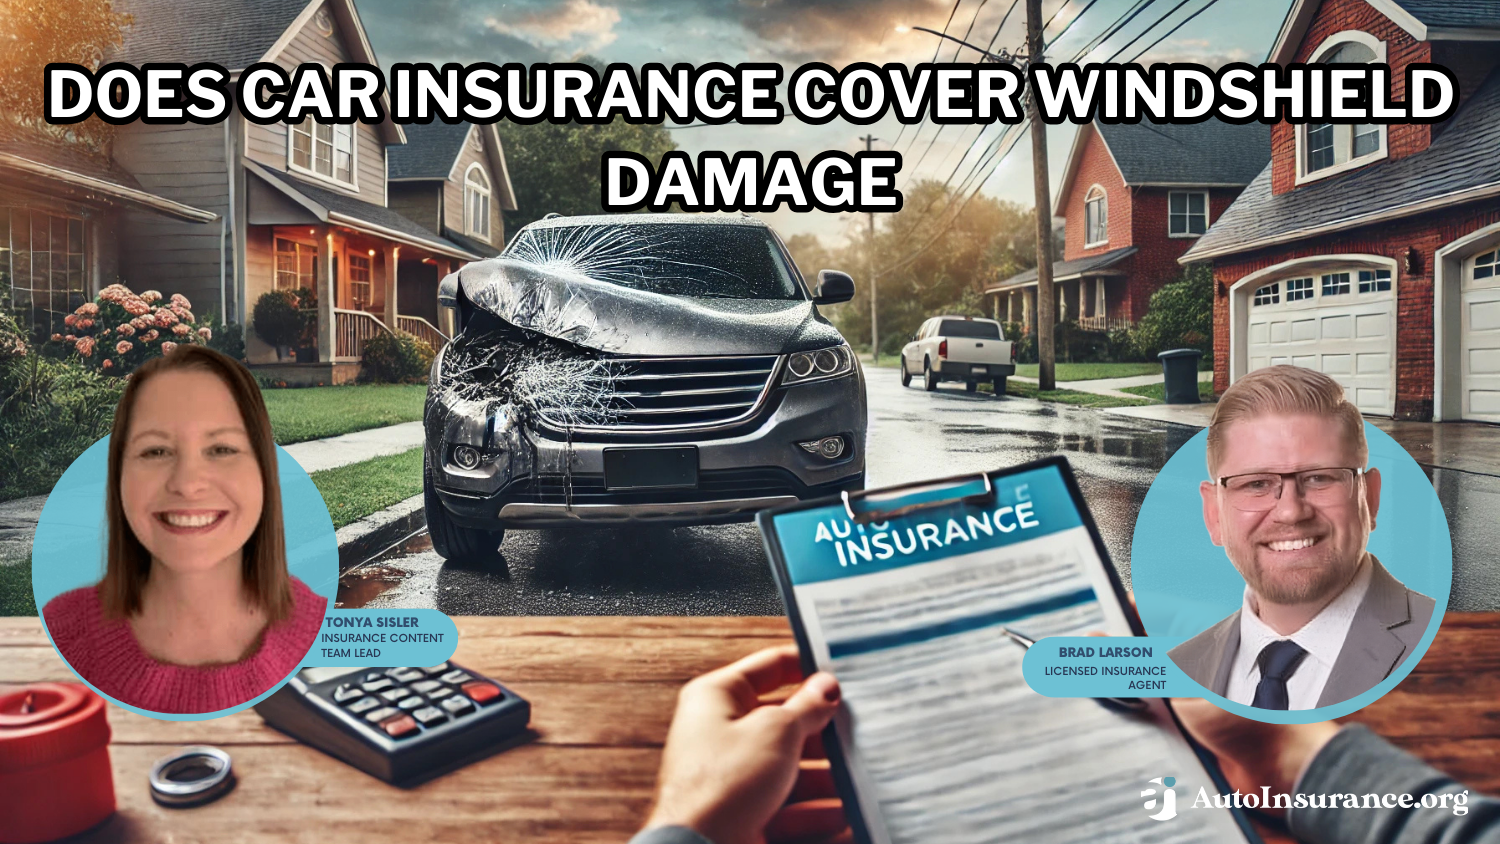 Does car insurance cover windshield damage or replacement?